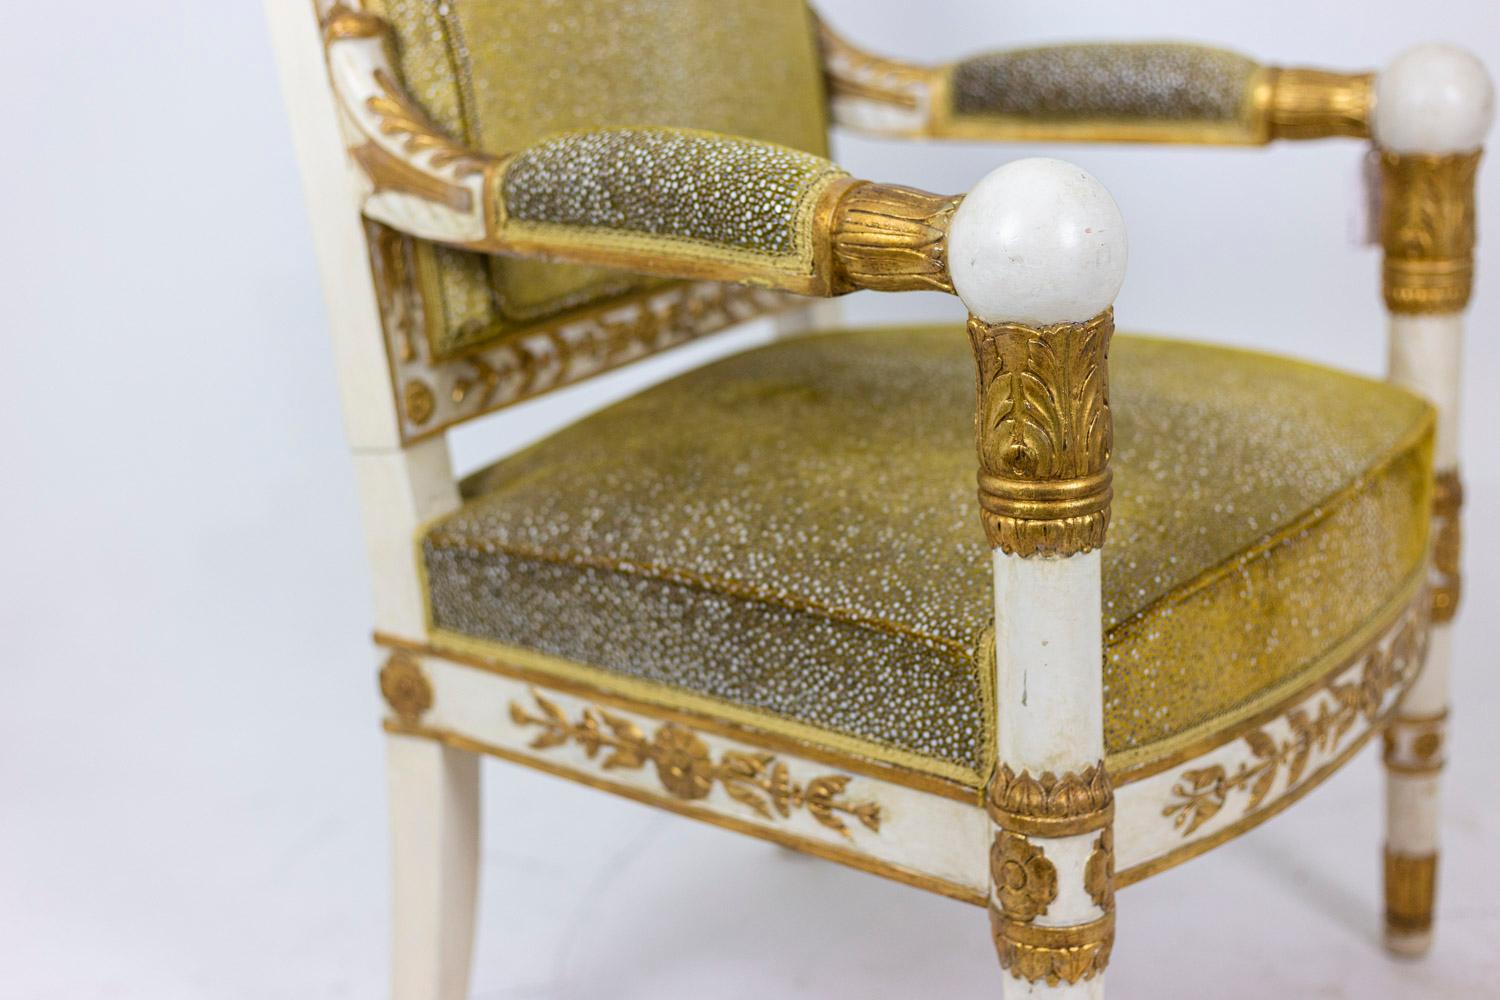 20th Century Empire Style White and Gold Pair of Armchairs, Sharkskin Style Trim, 1950s For Sale